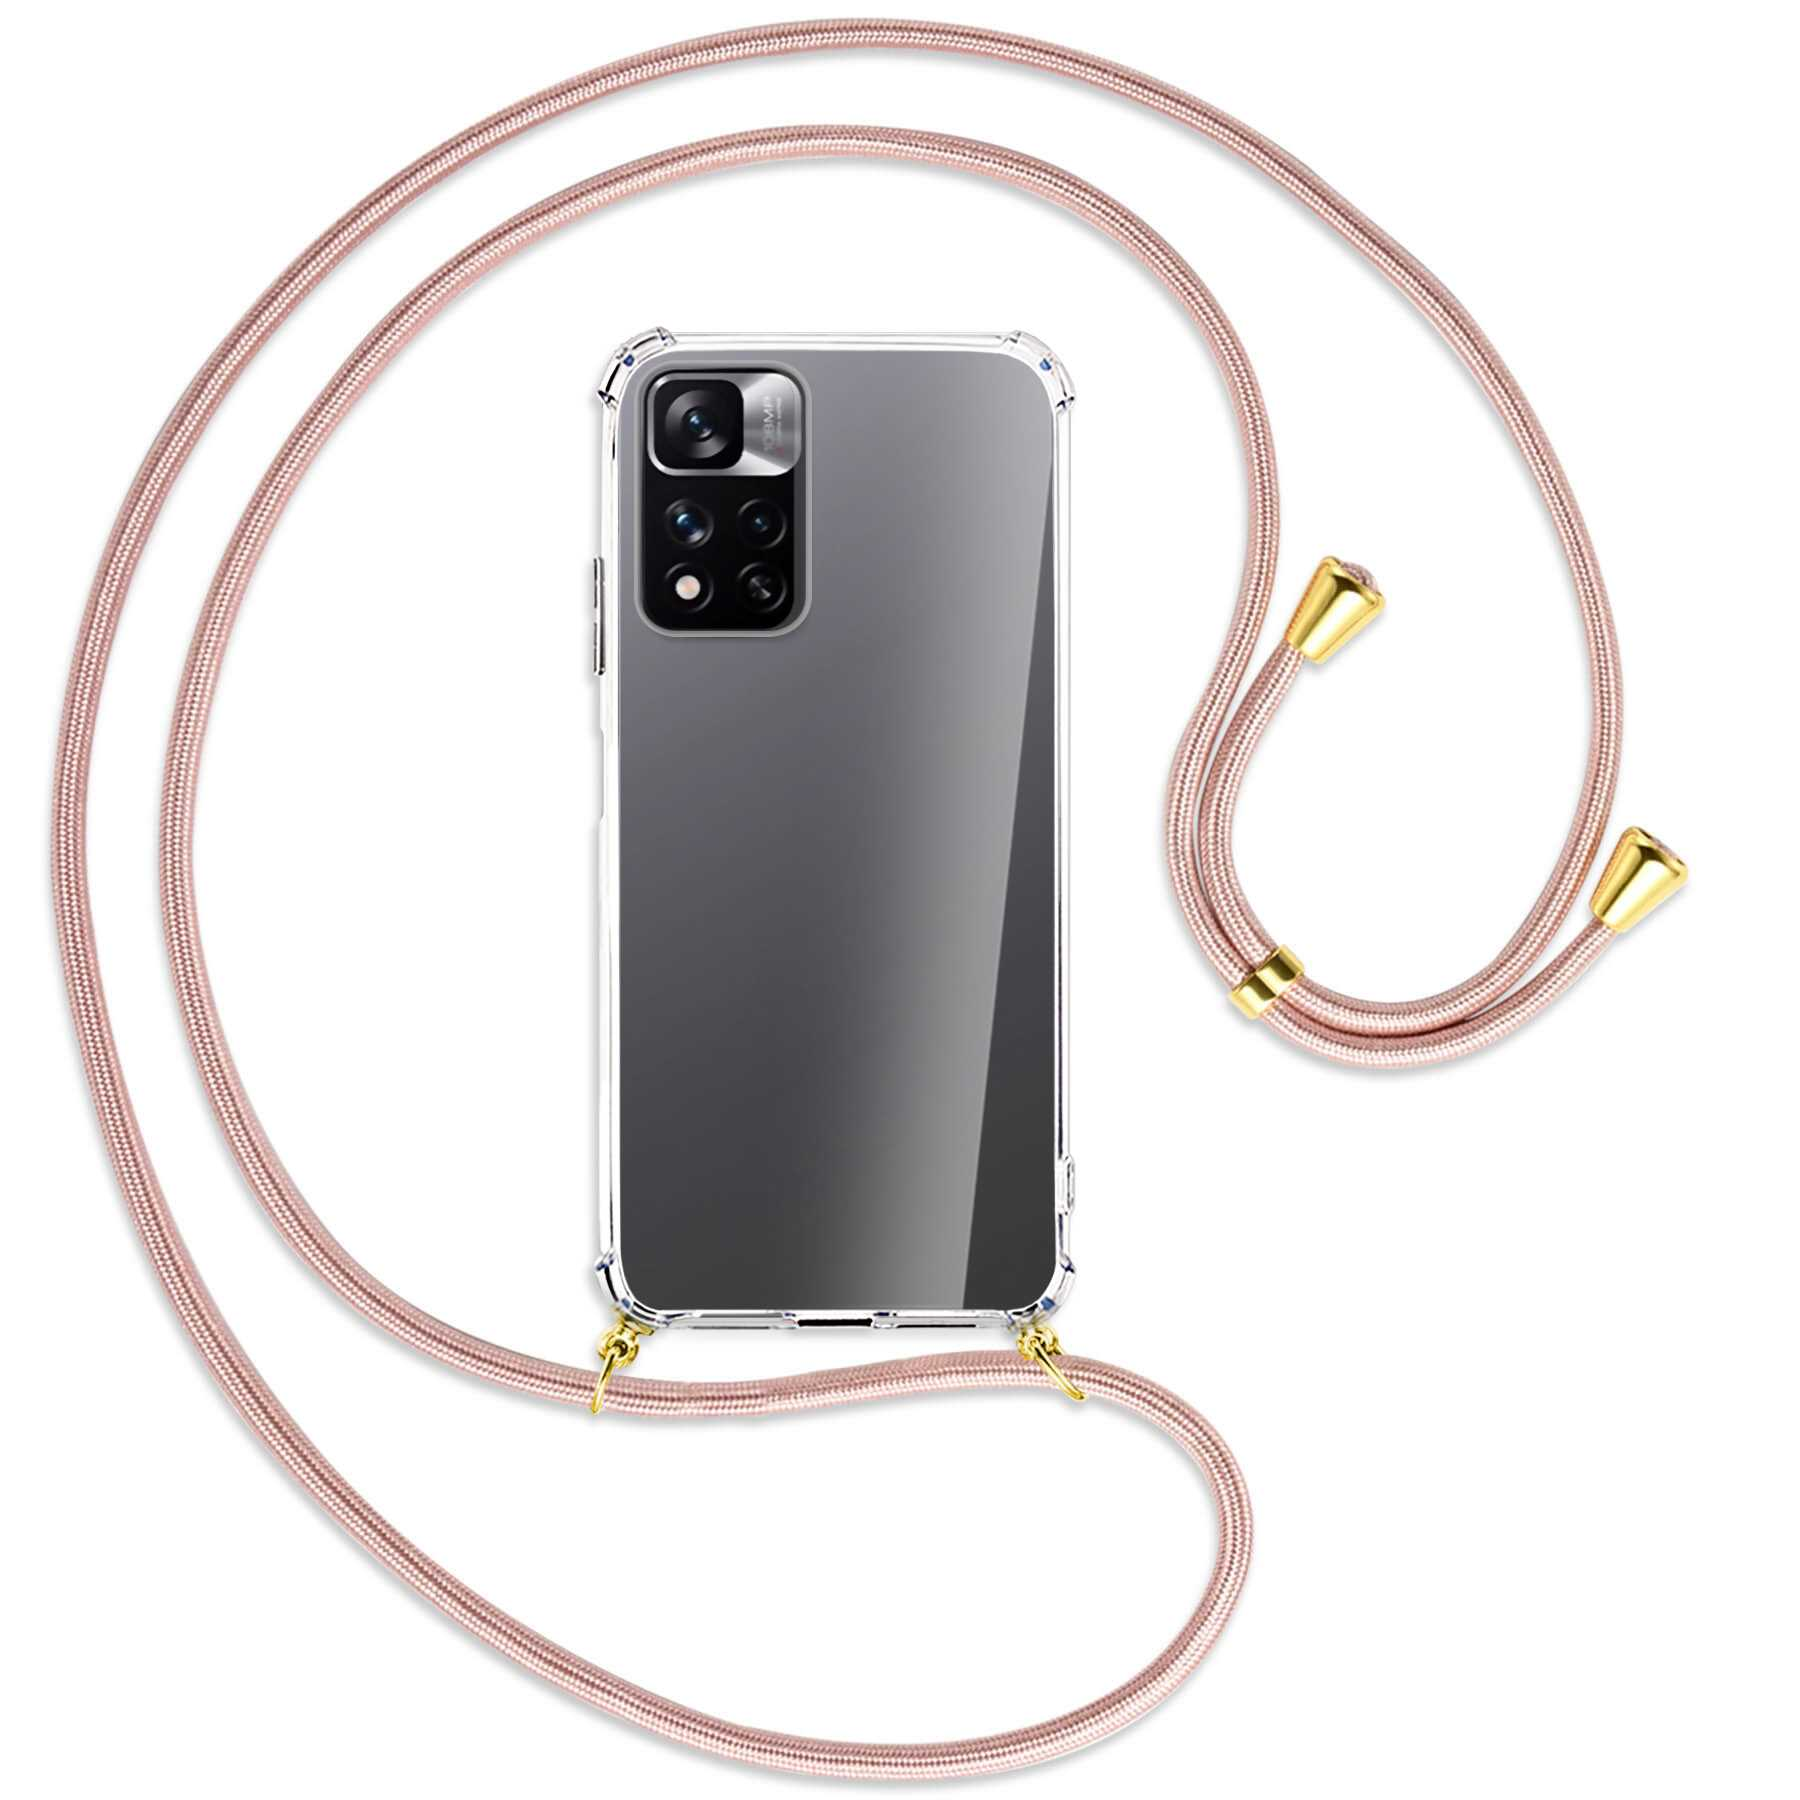 MTB MORE Note Rosegold Pro Gold Umhänge-Hülle Plus, / Redmi mit 11 11 ENERGY Redmi Pro+, Kordel, Note Backcover, Xiaomi